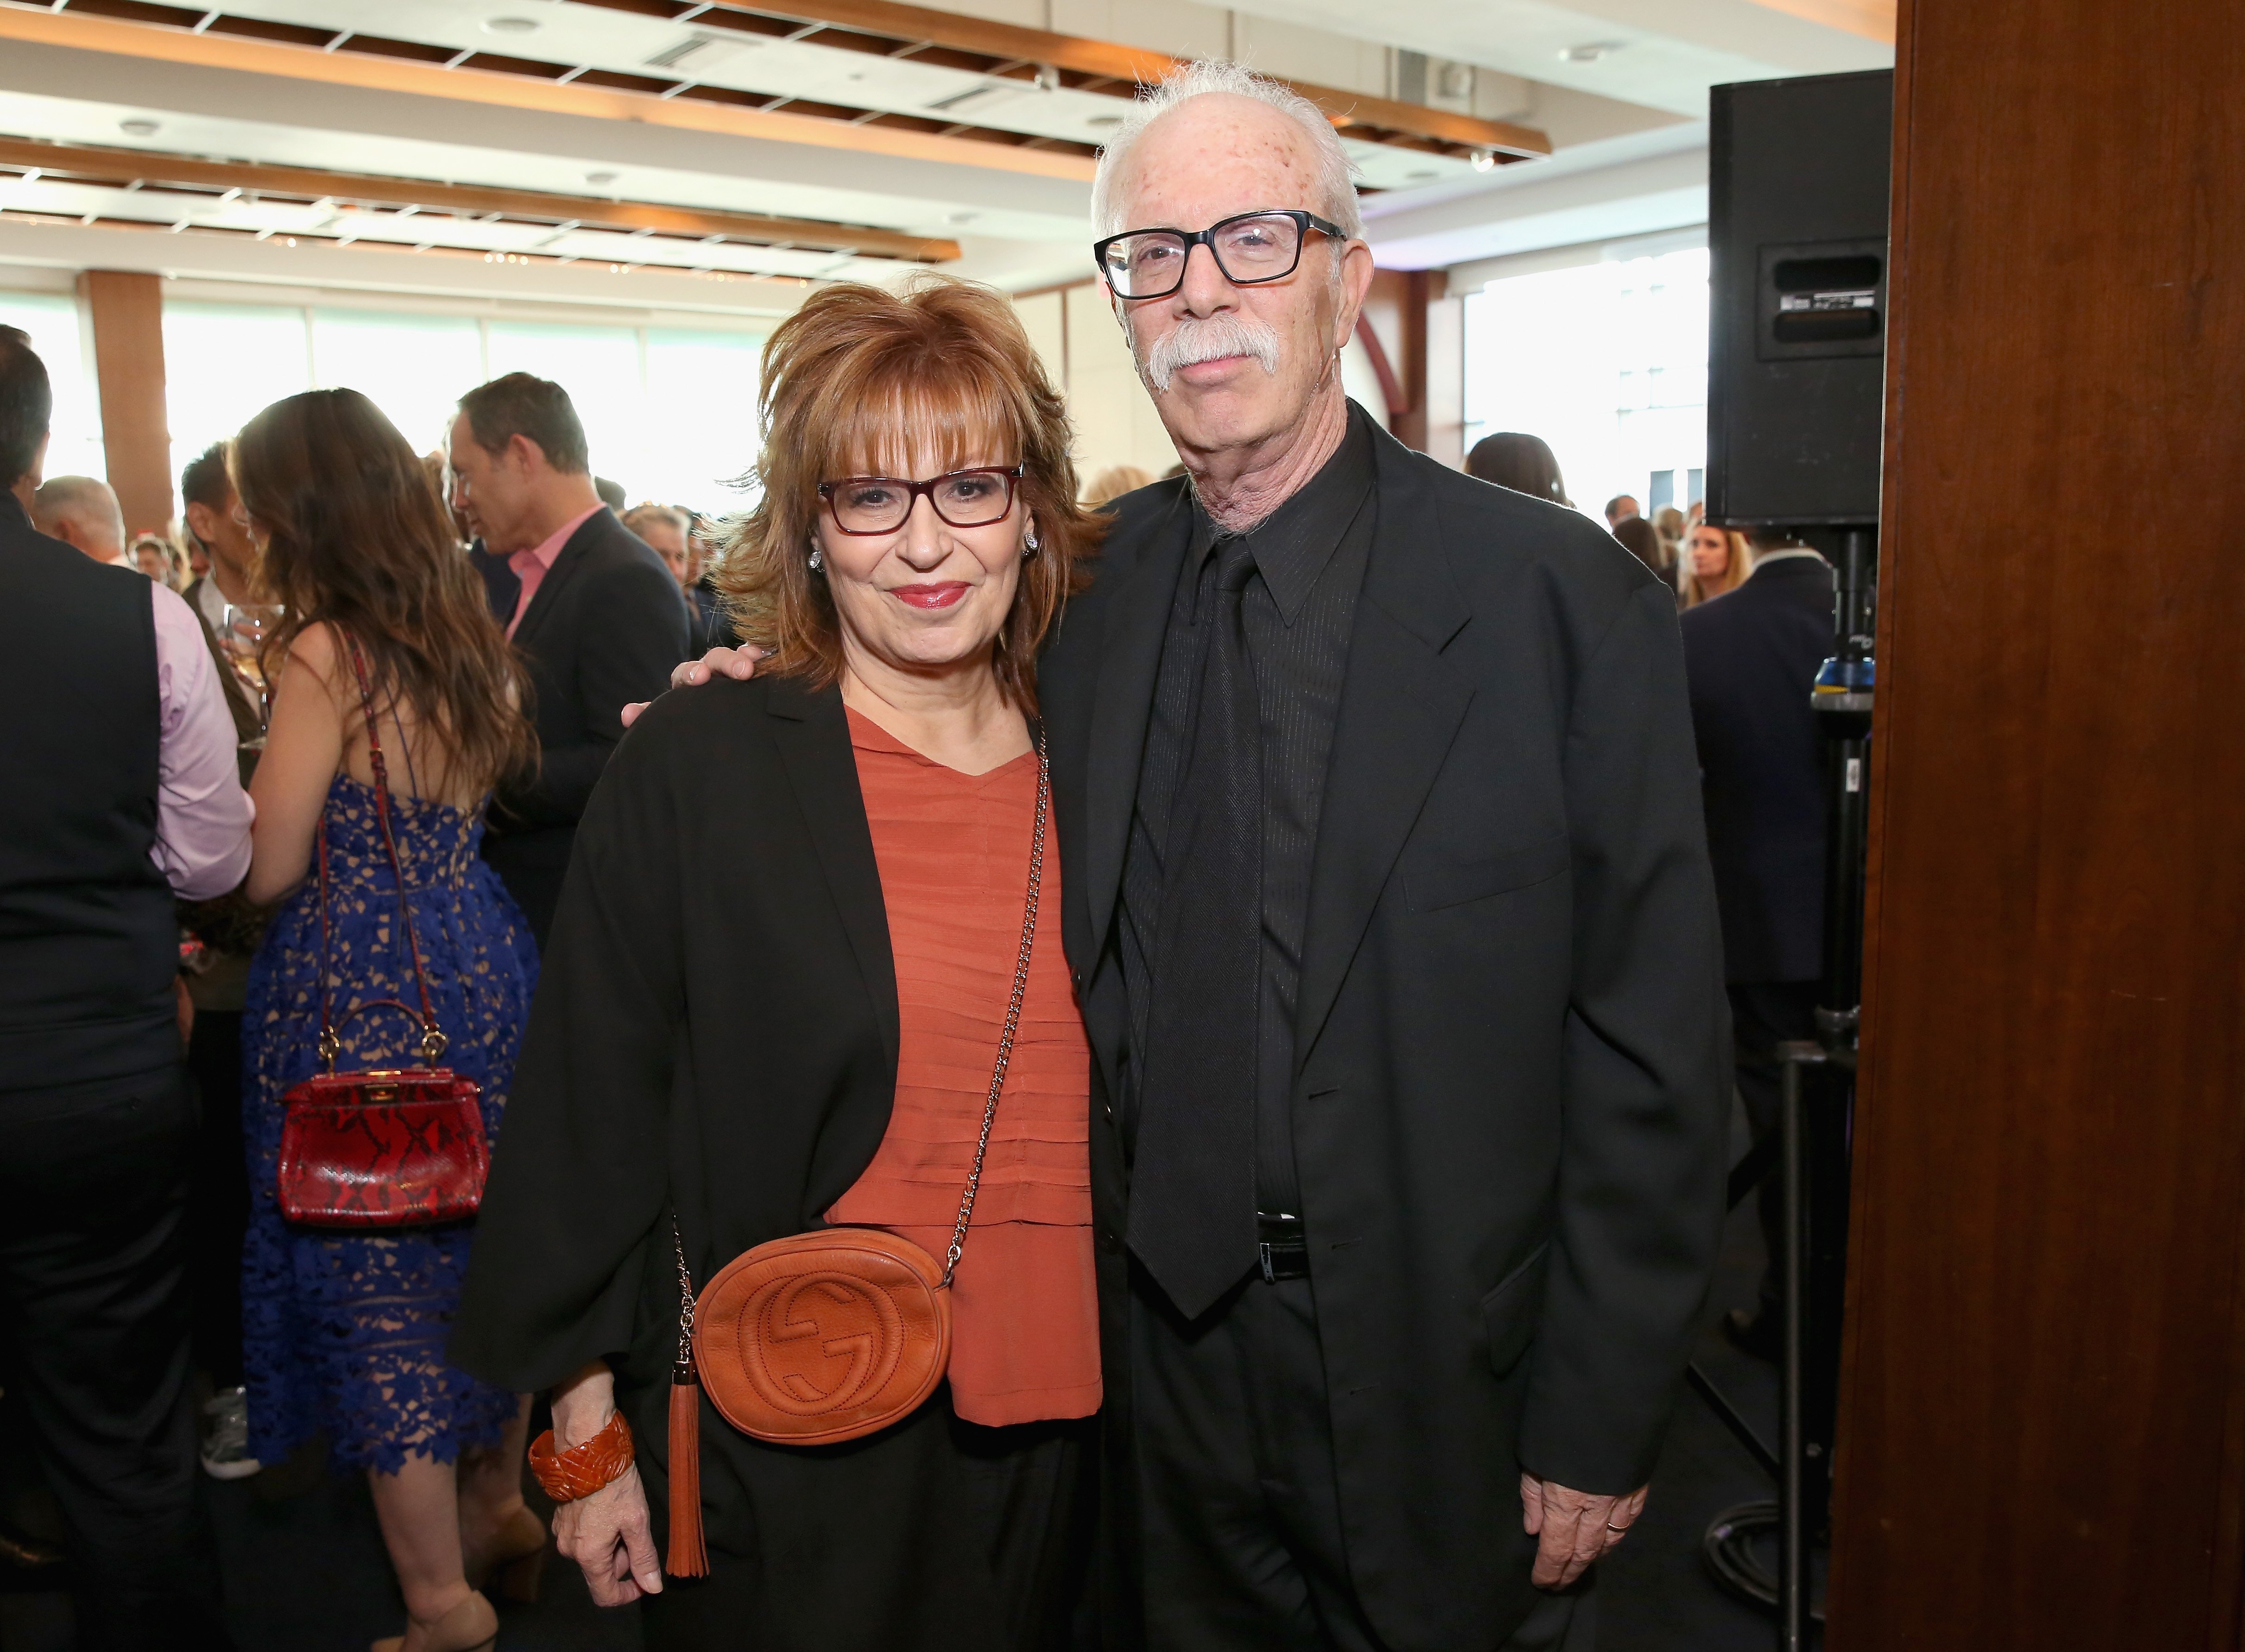 Joy Behar and Steve Janowitz at Family Equality Council's "Night at the Pier" at Pier 60 on May 8, 2017 in New York City. | Source: Getty Images.